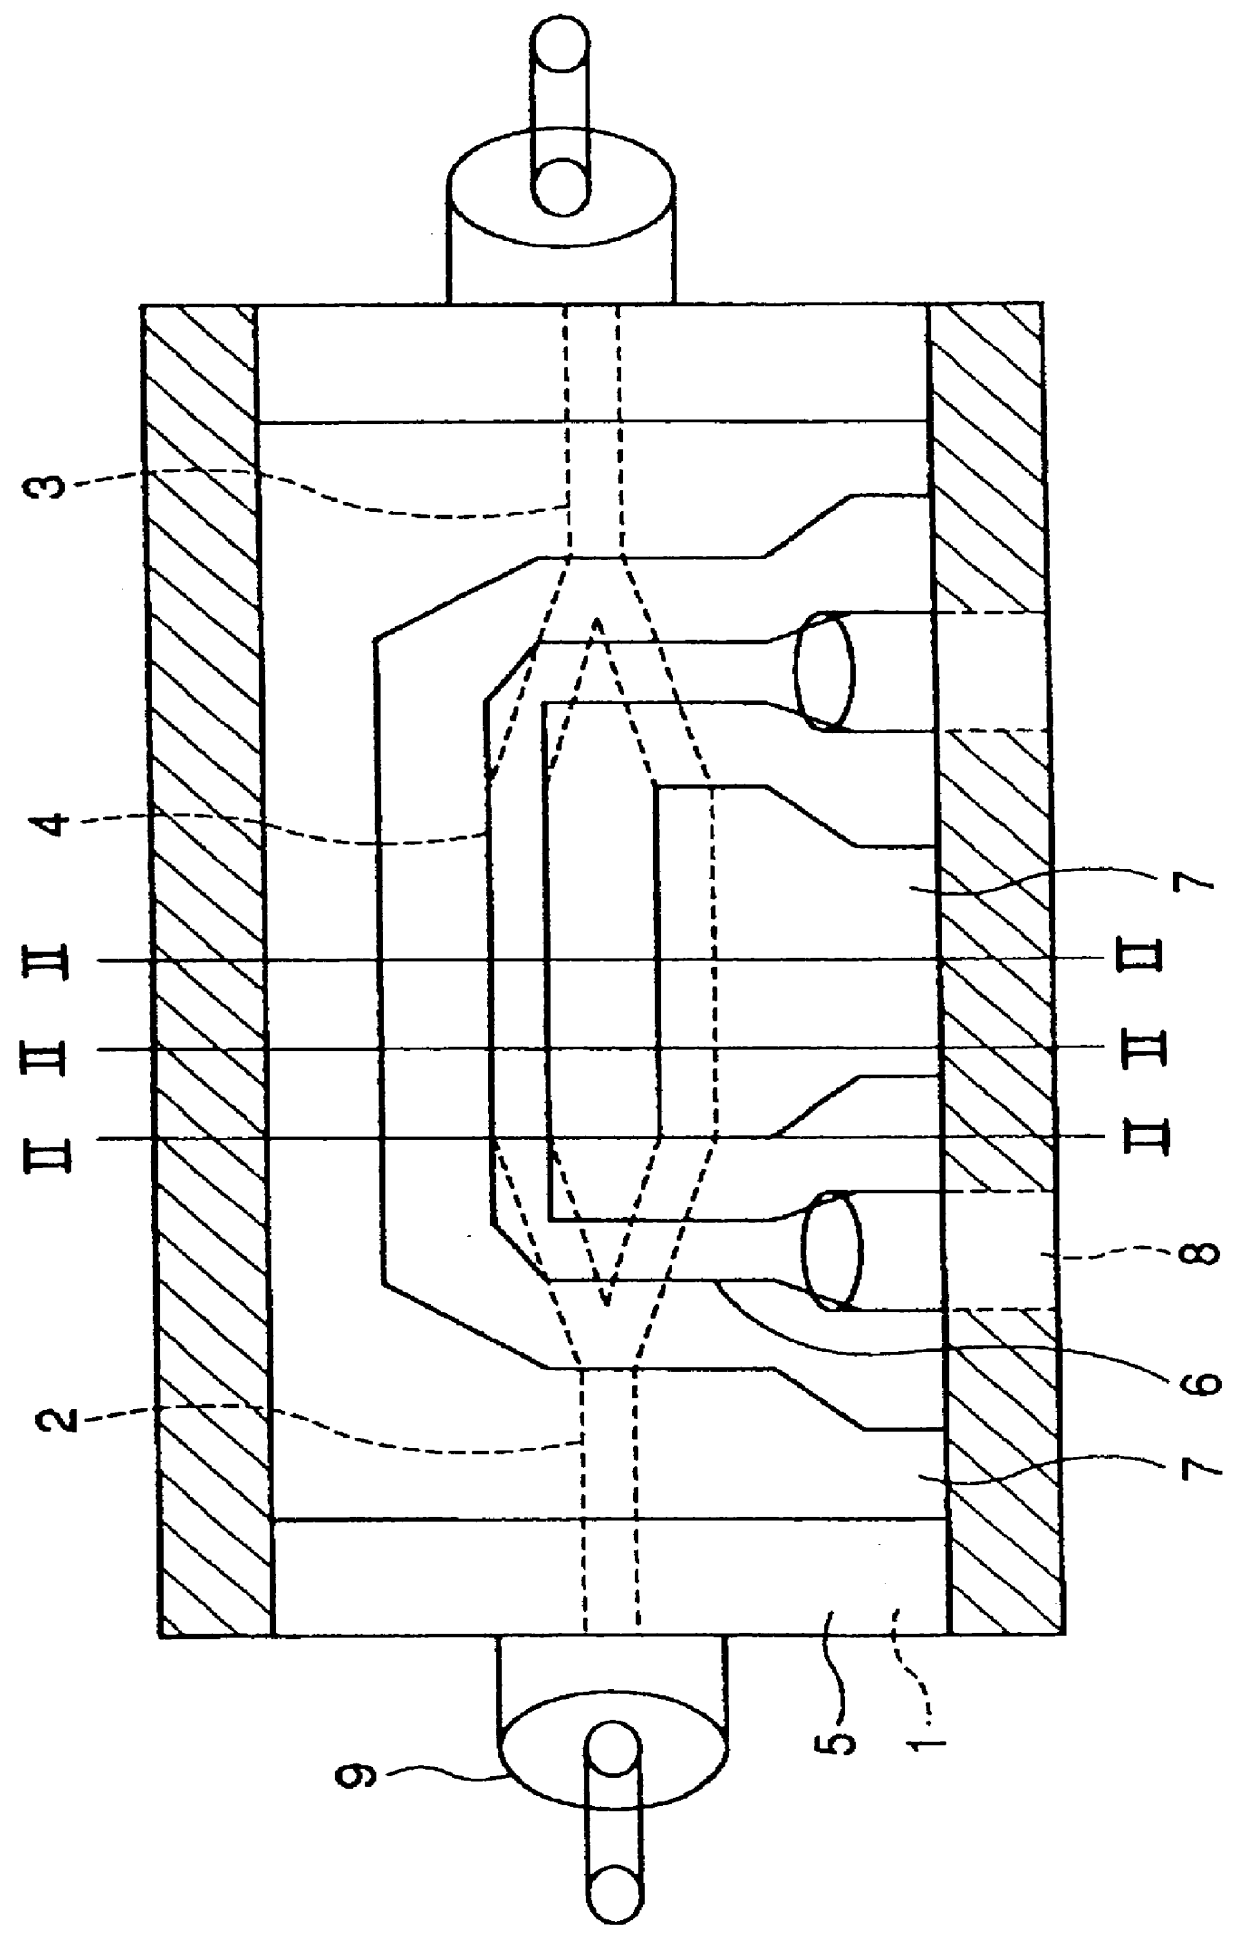 Wide band and low driving voltage optical modulator with an improved dielectric buffer layer